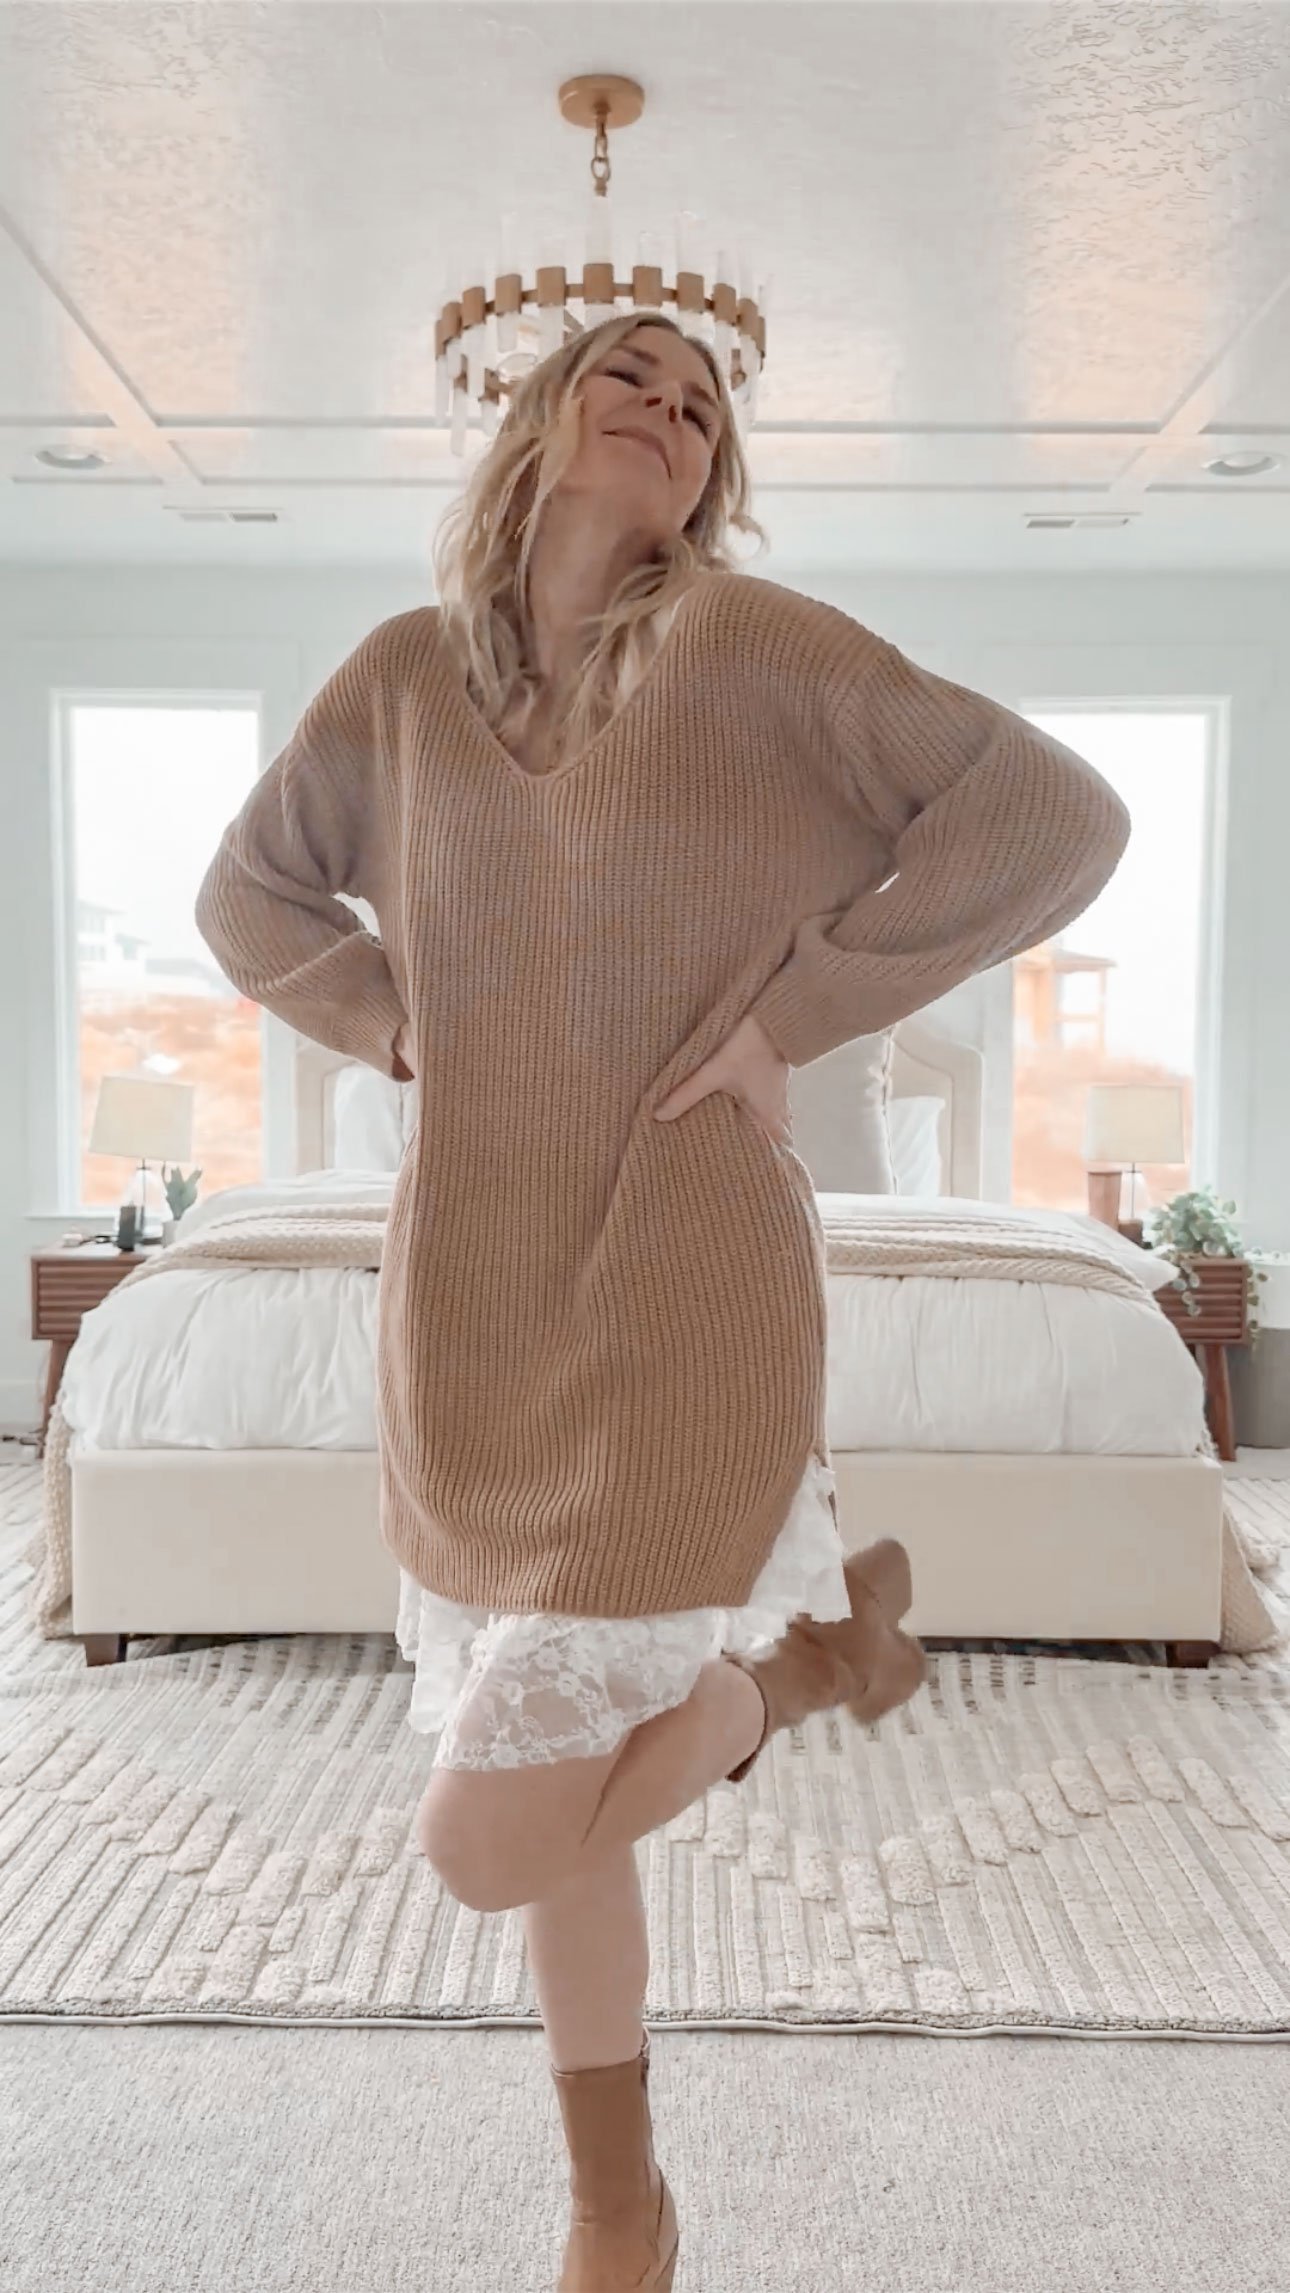 Lace Slip Dresses  Dress Up Any Sweater — The Overwhelmed Mommy Blog